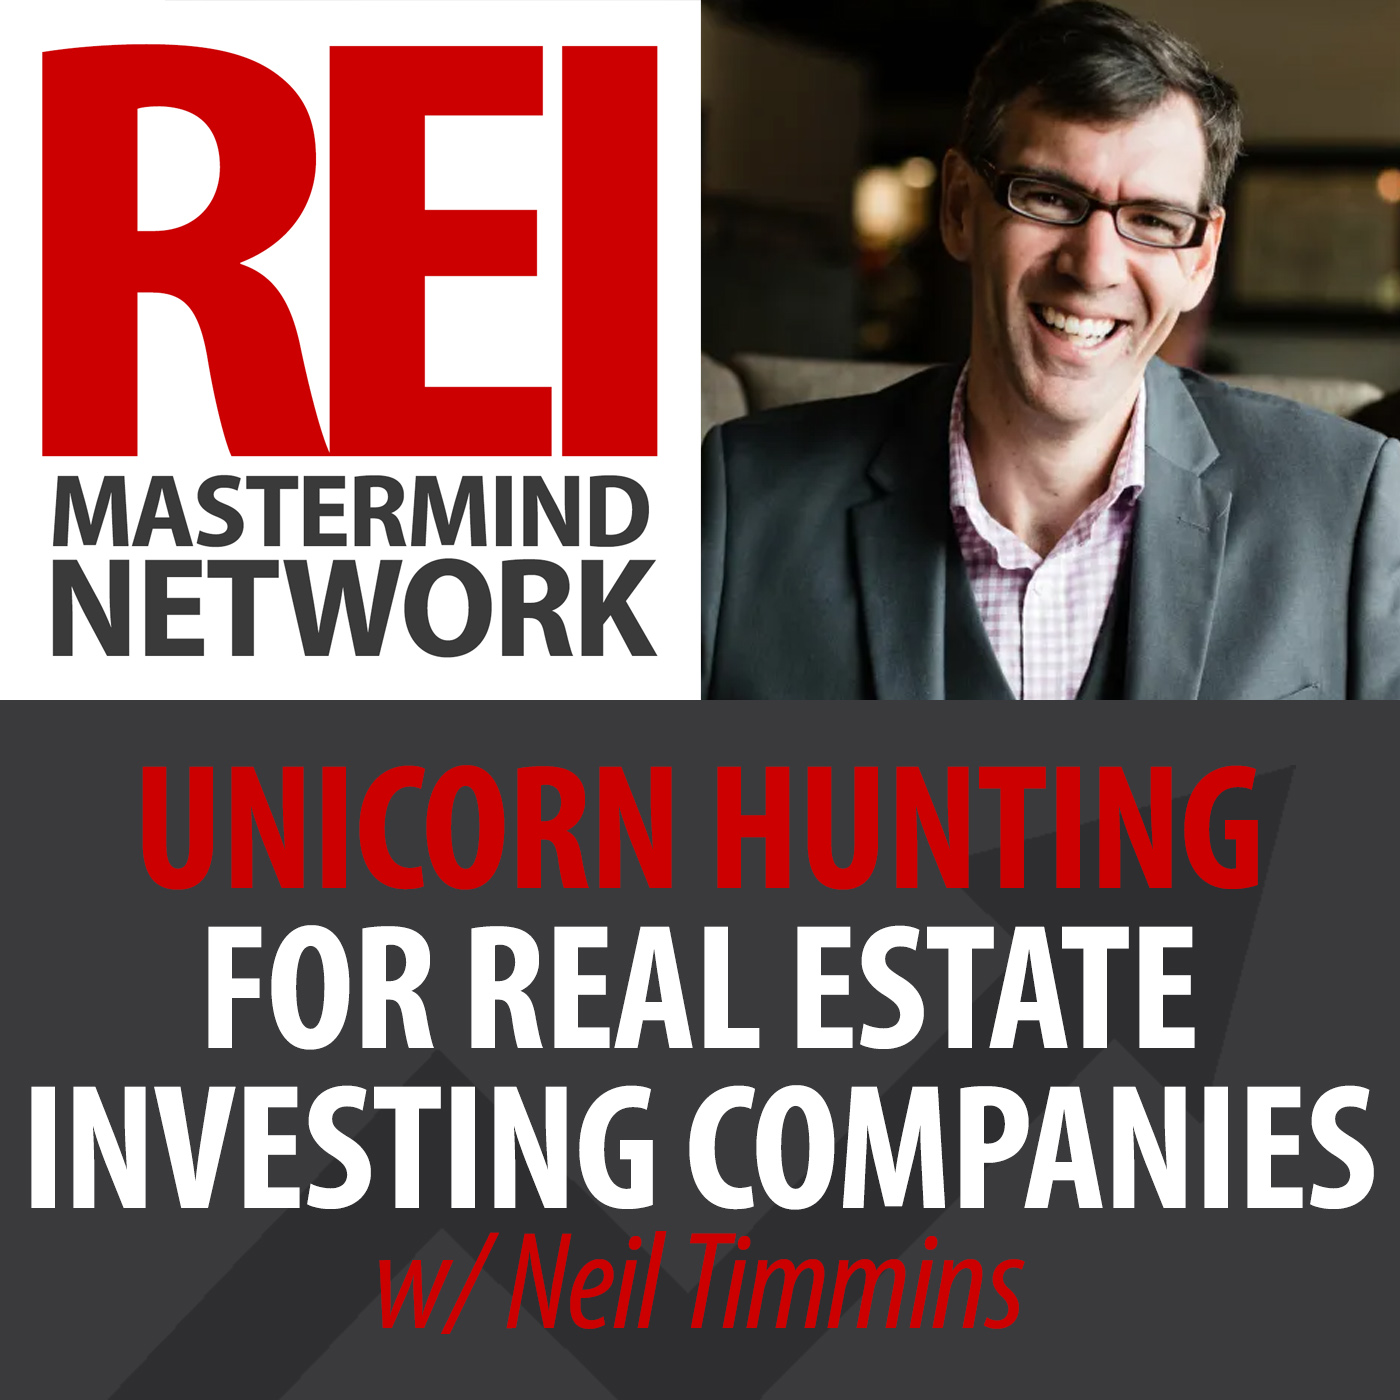 Unicorn Hunting for Real Estate Investment Companies with Neil Timmins